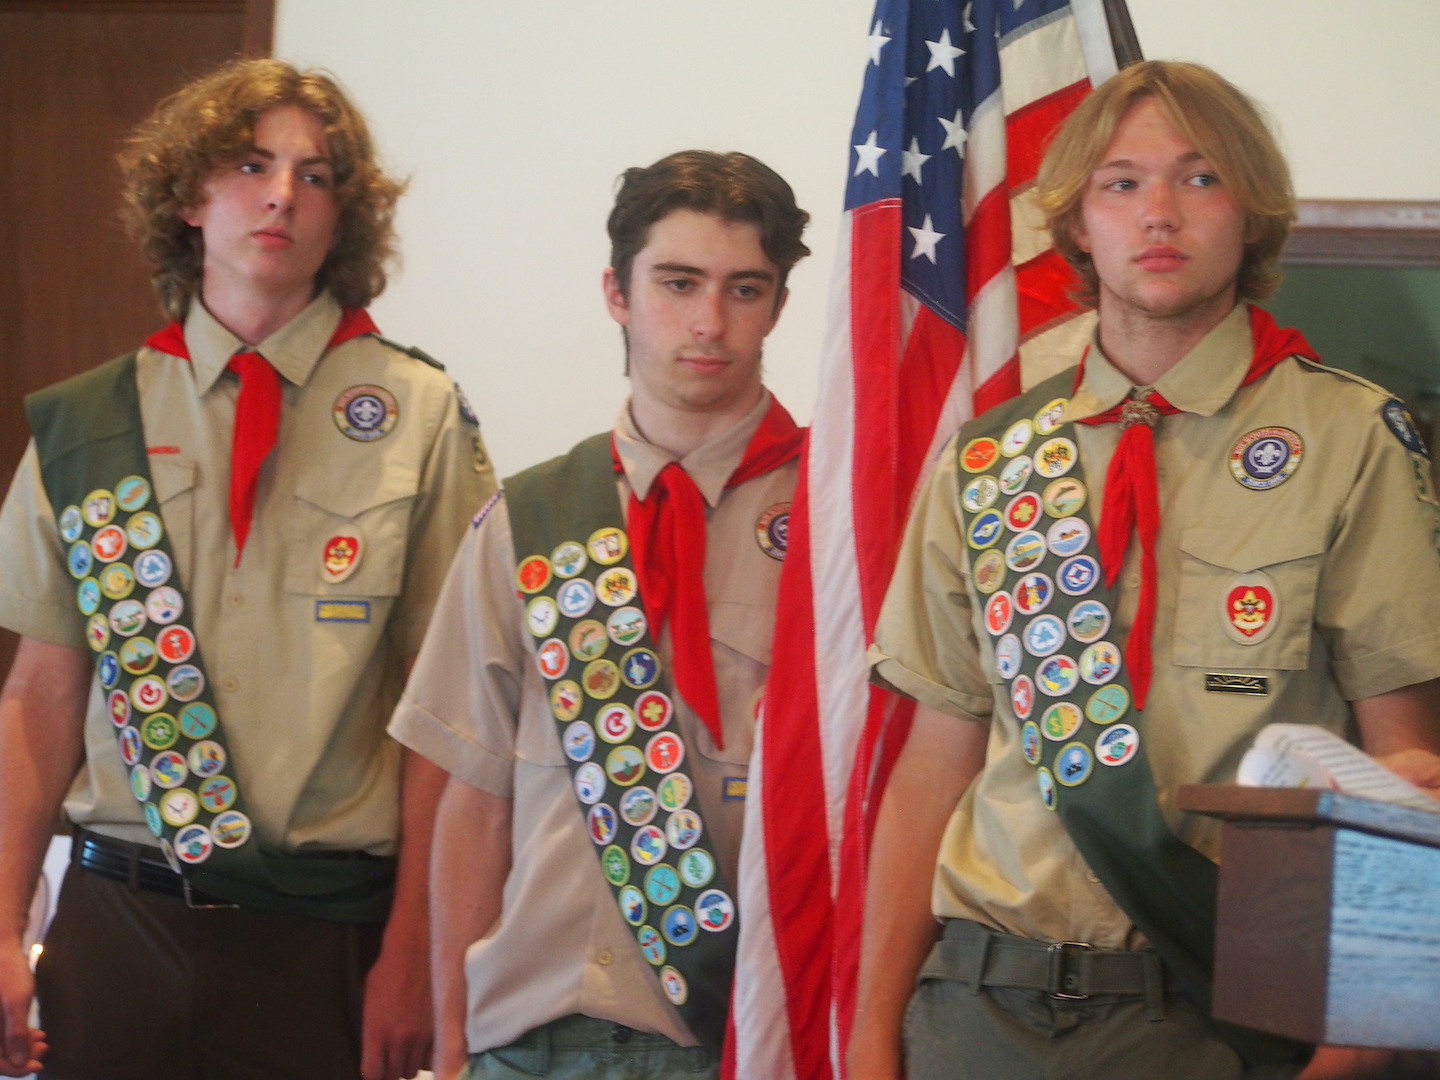 Owen Brockvescio, Jacob Clark and Brandon Farquharson, all members of Boy Scout Troop 510, were awarded the rank of Eagle Scout.